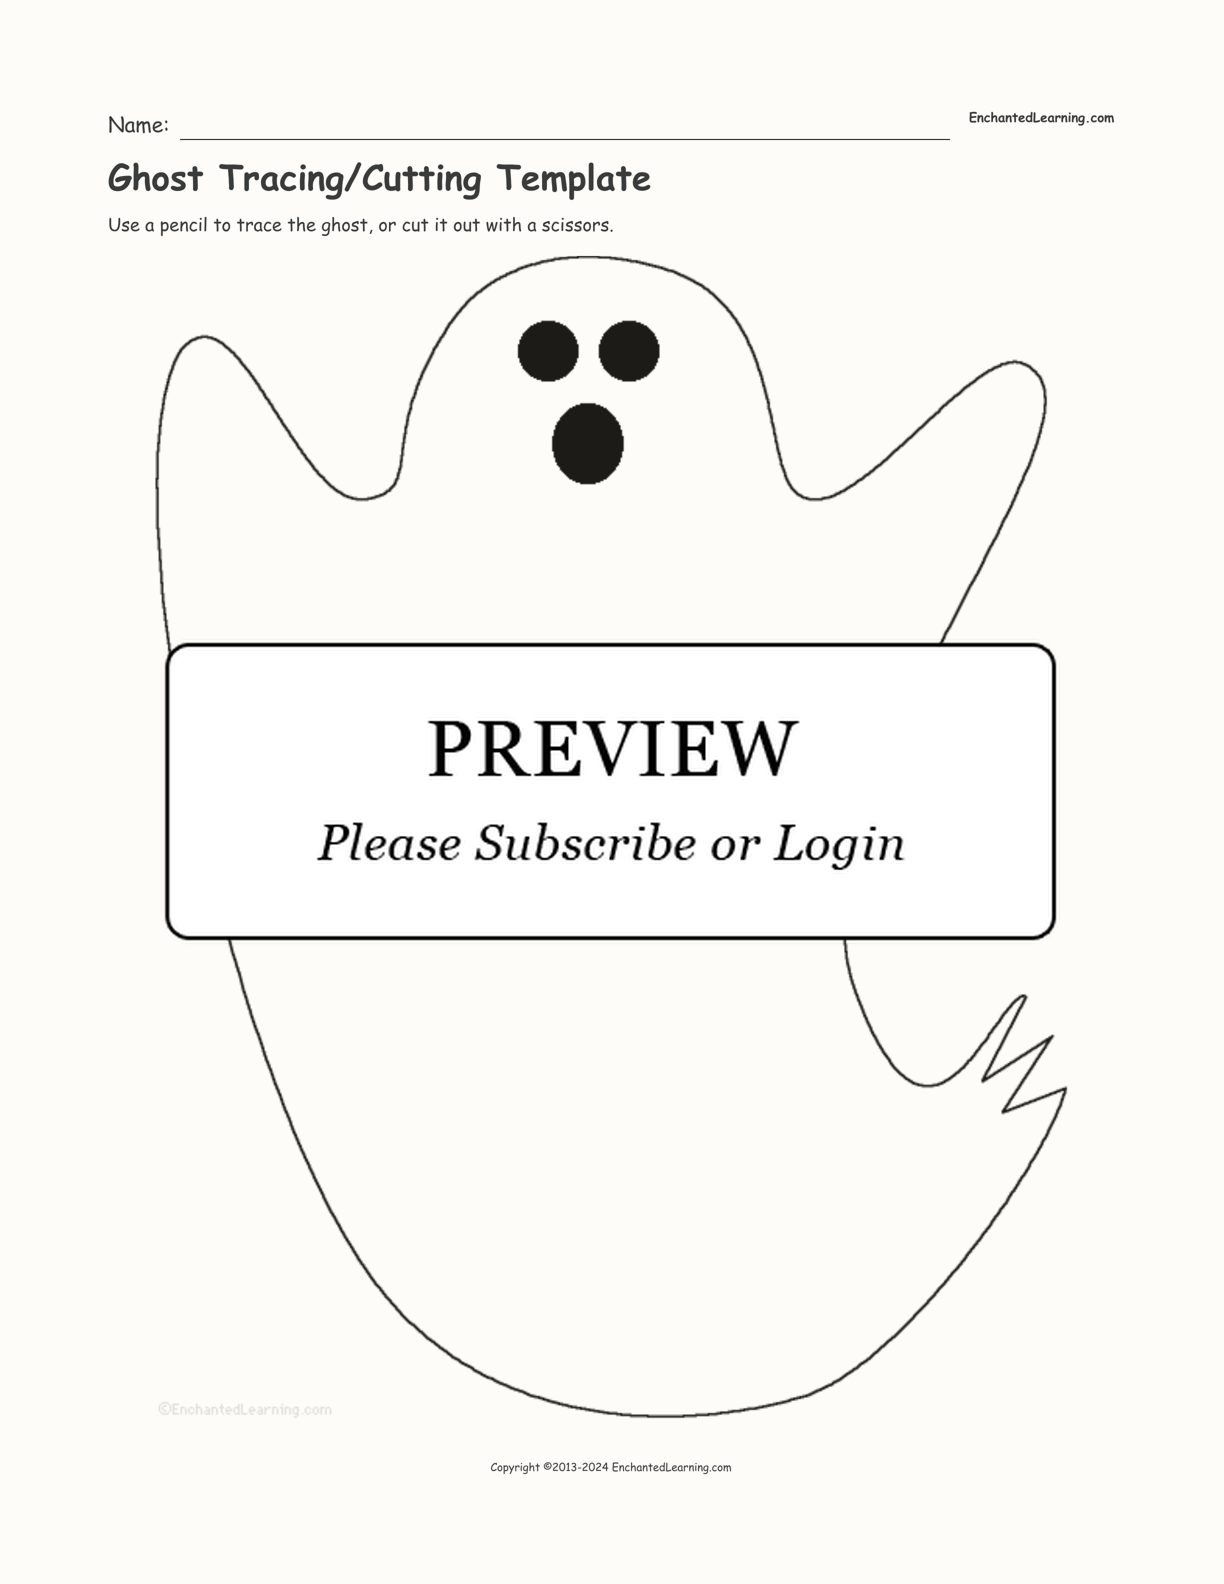 Ghost Tracing/Cutting Template interactive worksheet page 1